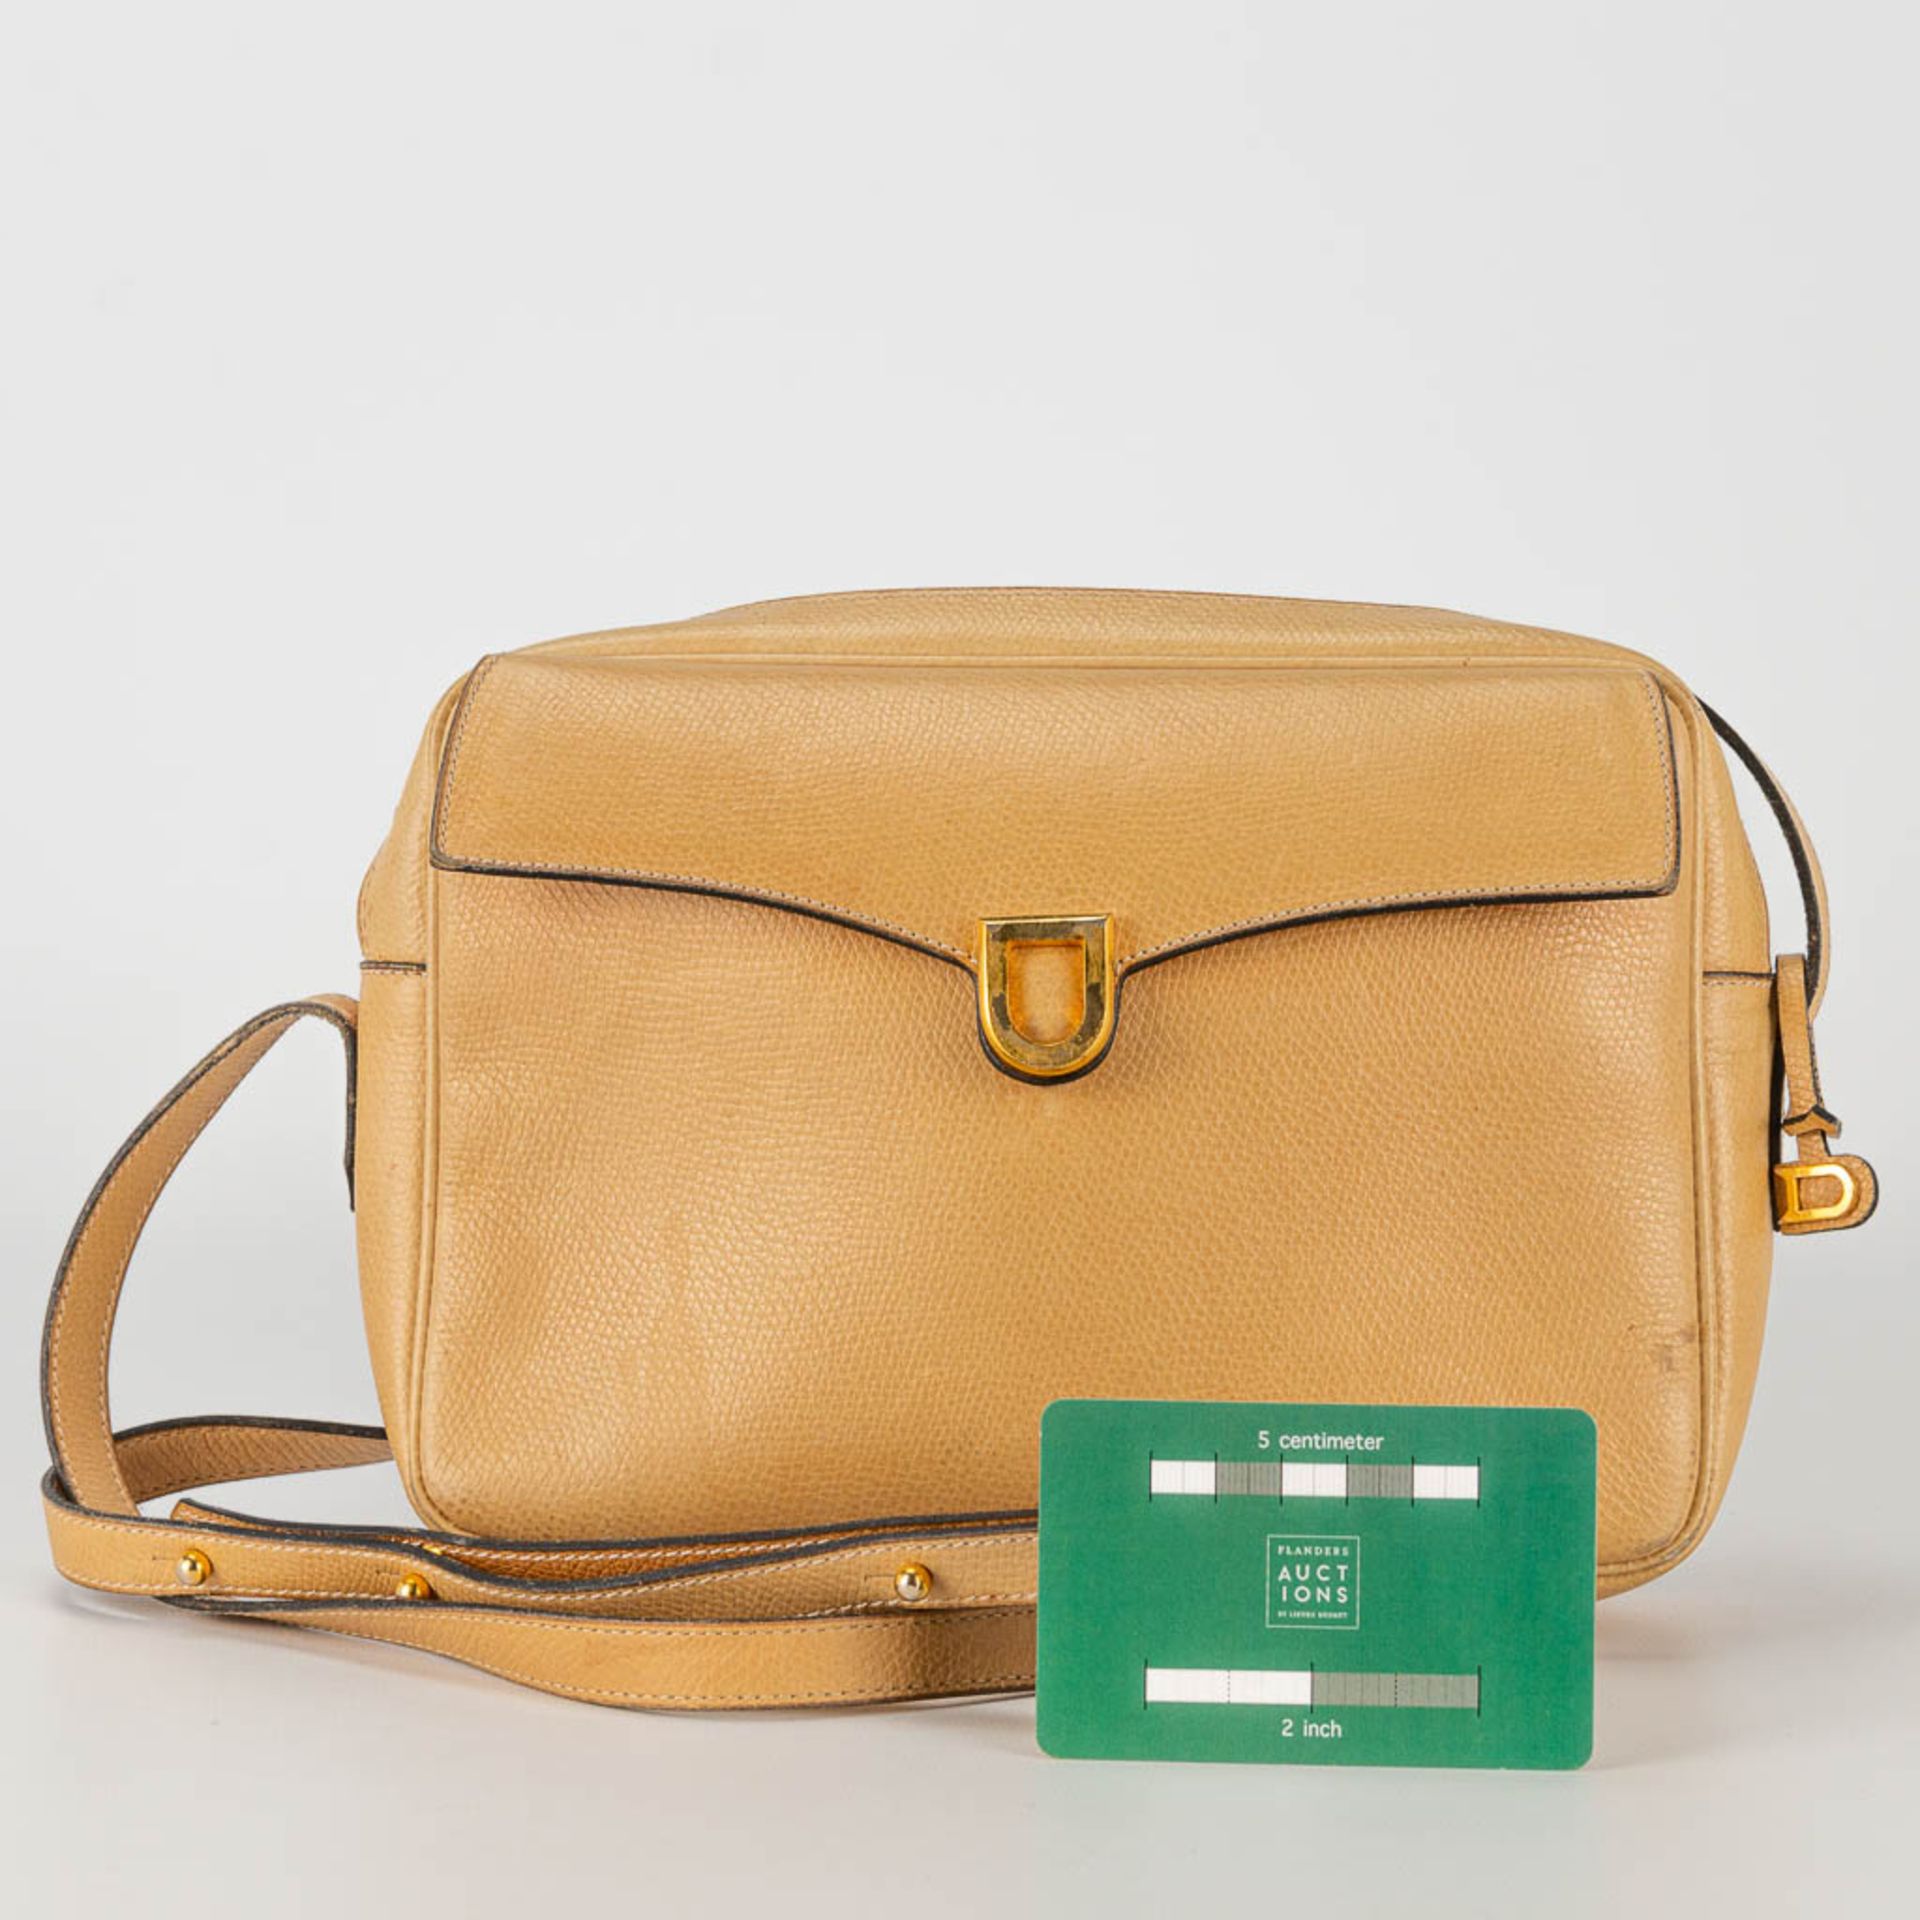 A purse made of brown leather and marked Delvaux. - Image 4 of 14